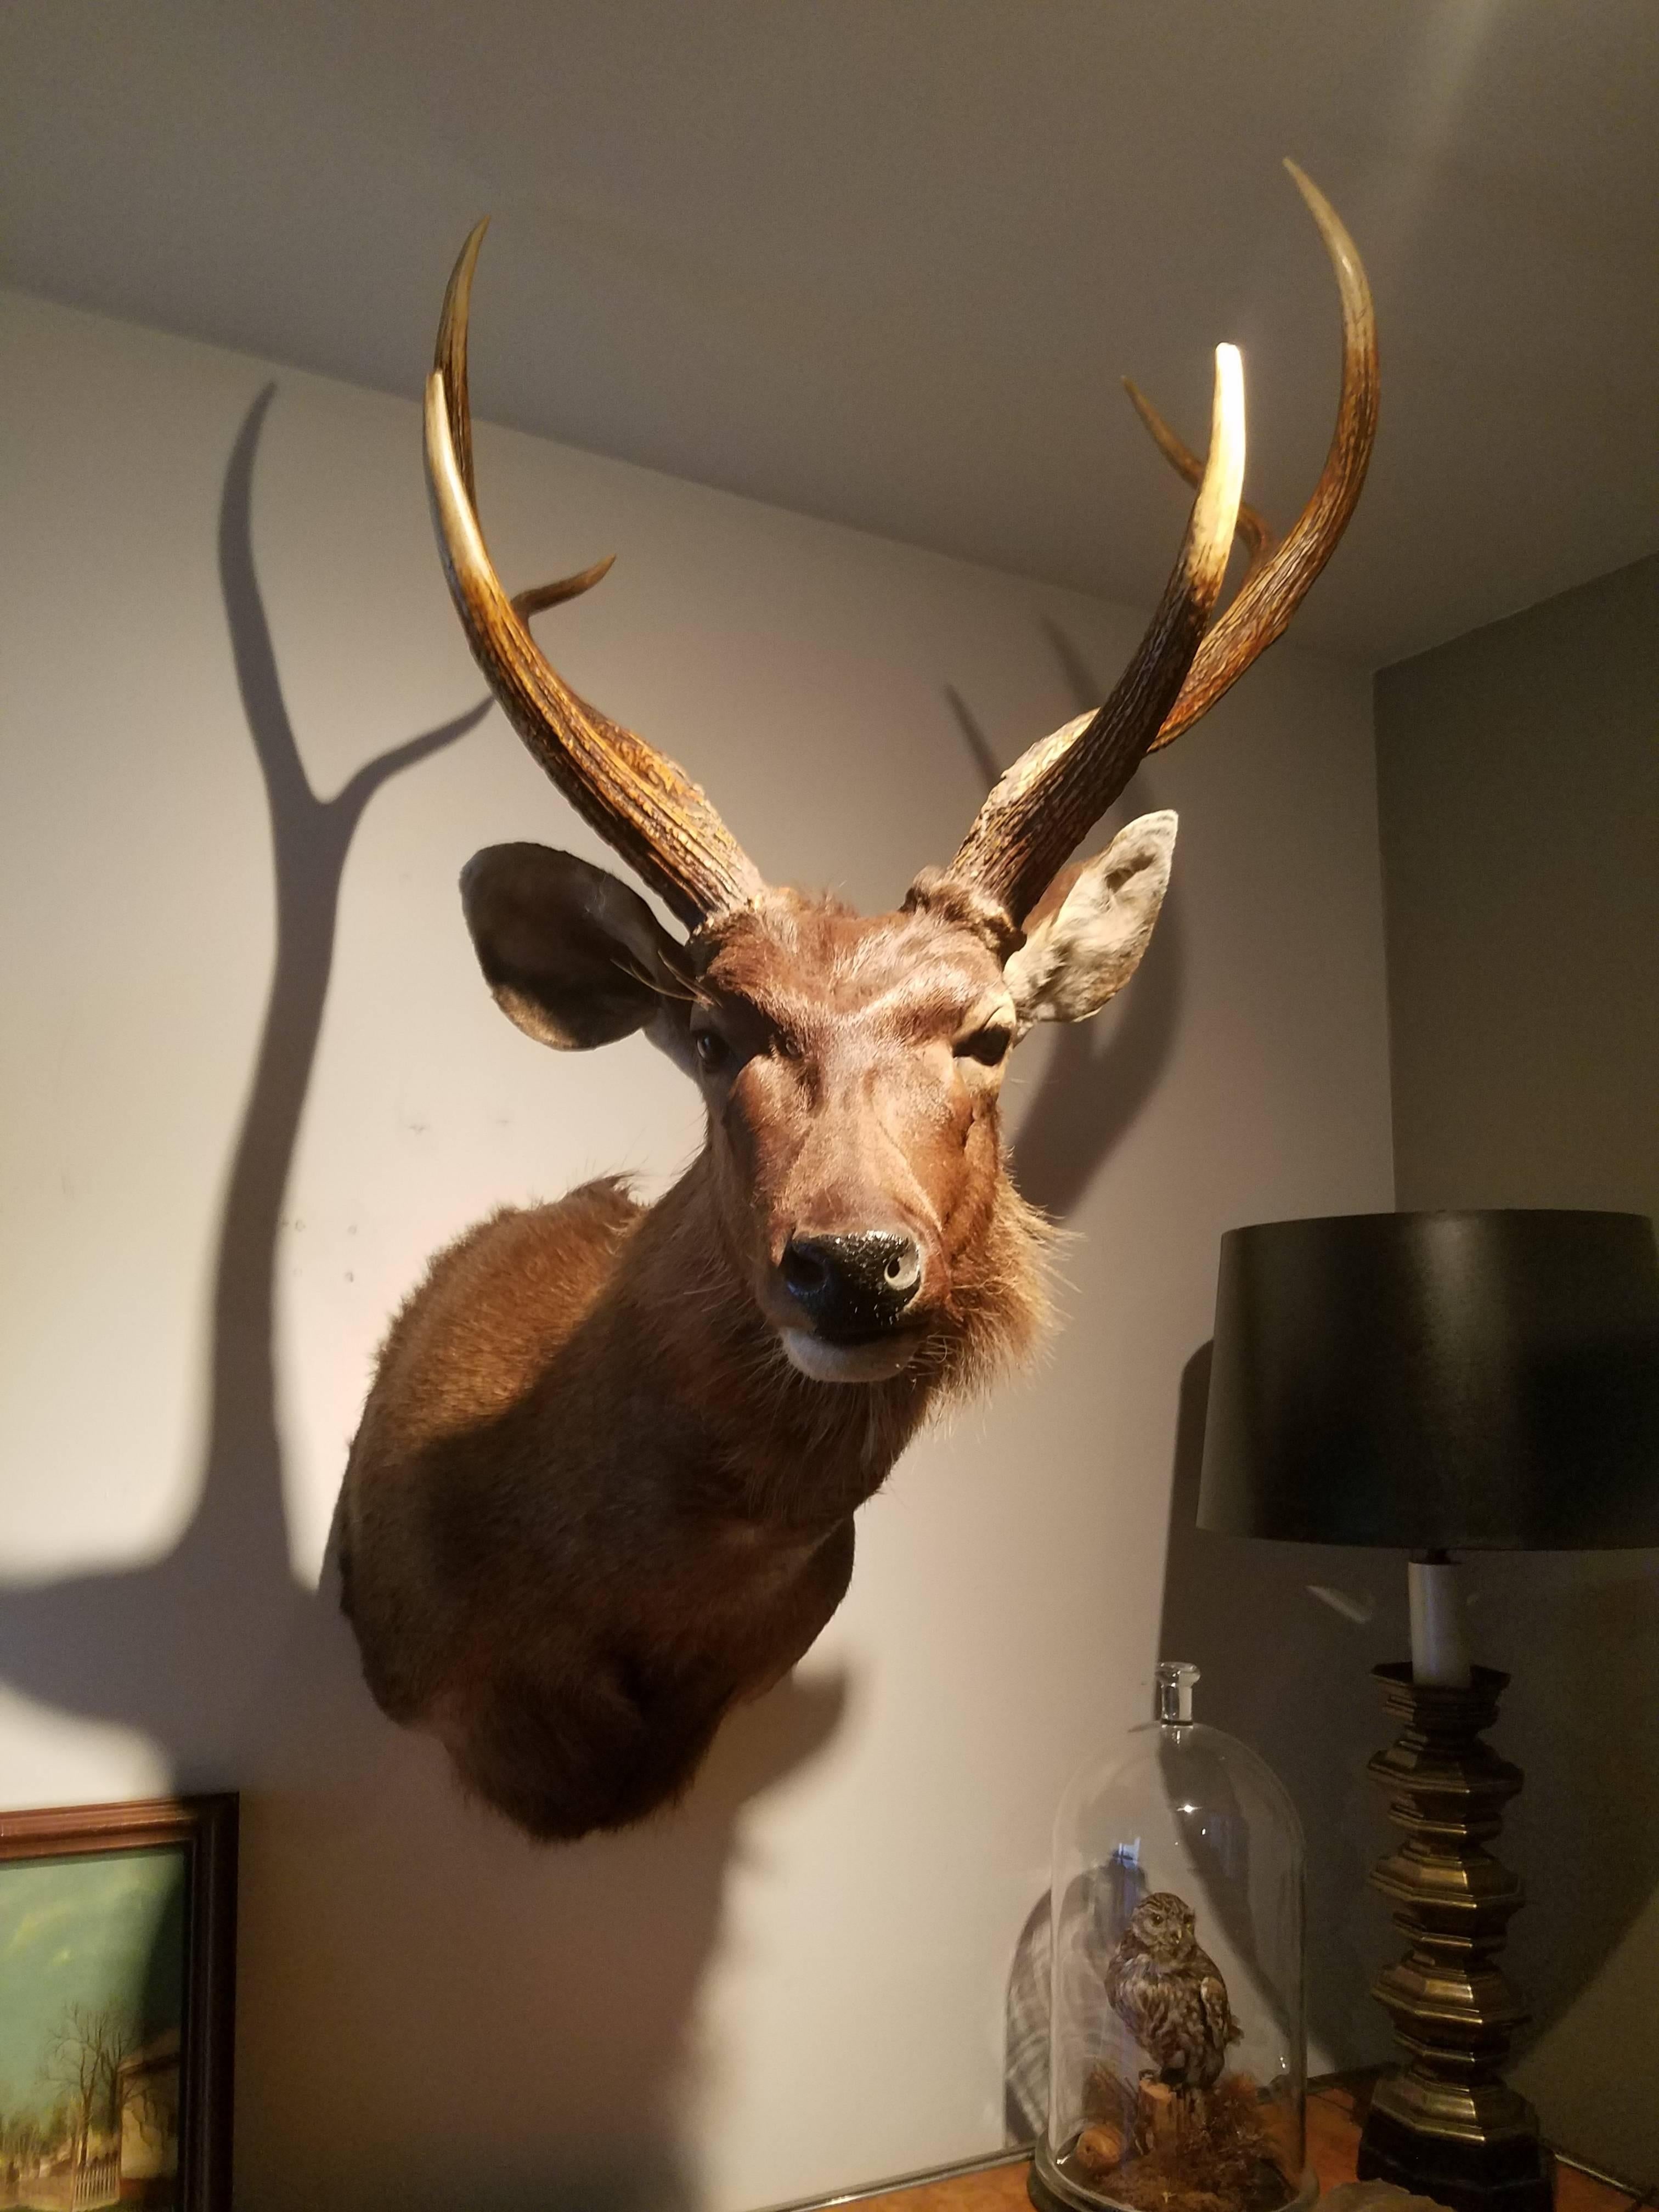 This is a beautiful South Pacific Red Stag shoulder taxidermy mount. It is posed with the head upright looking to the stag's right side out into the room. It has an extraordinary hide with excellent hair quality and great size.

The red deer is